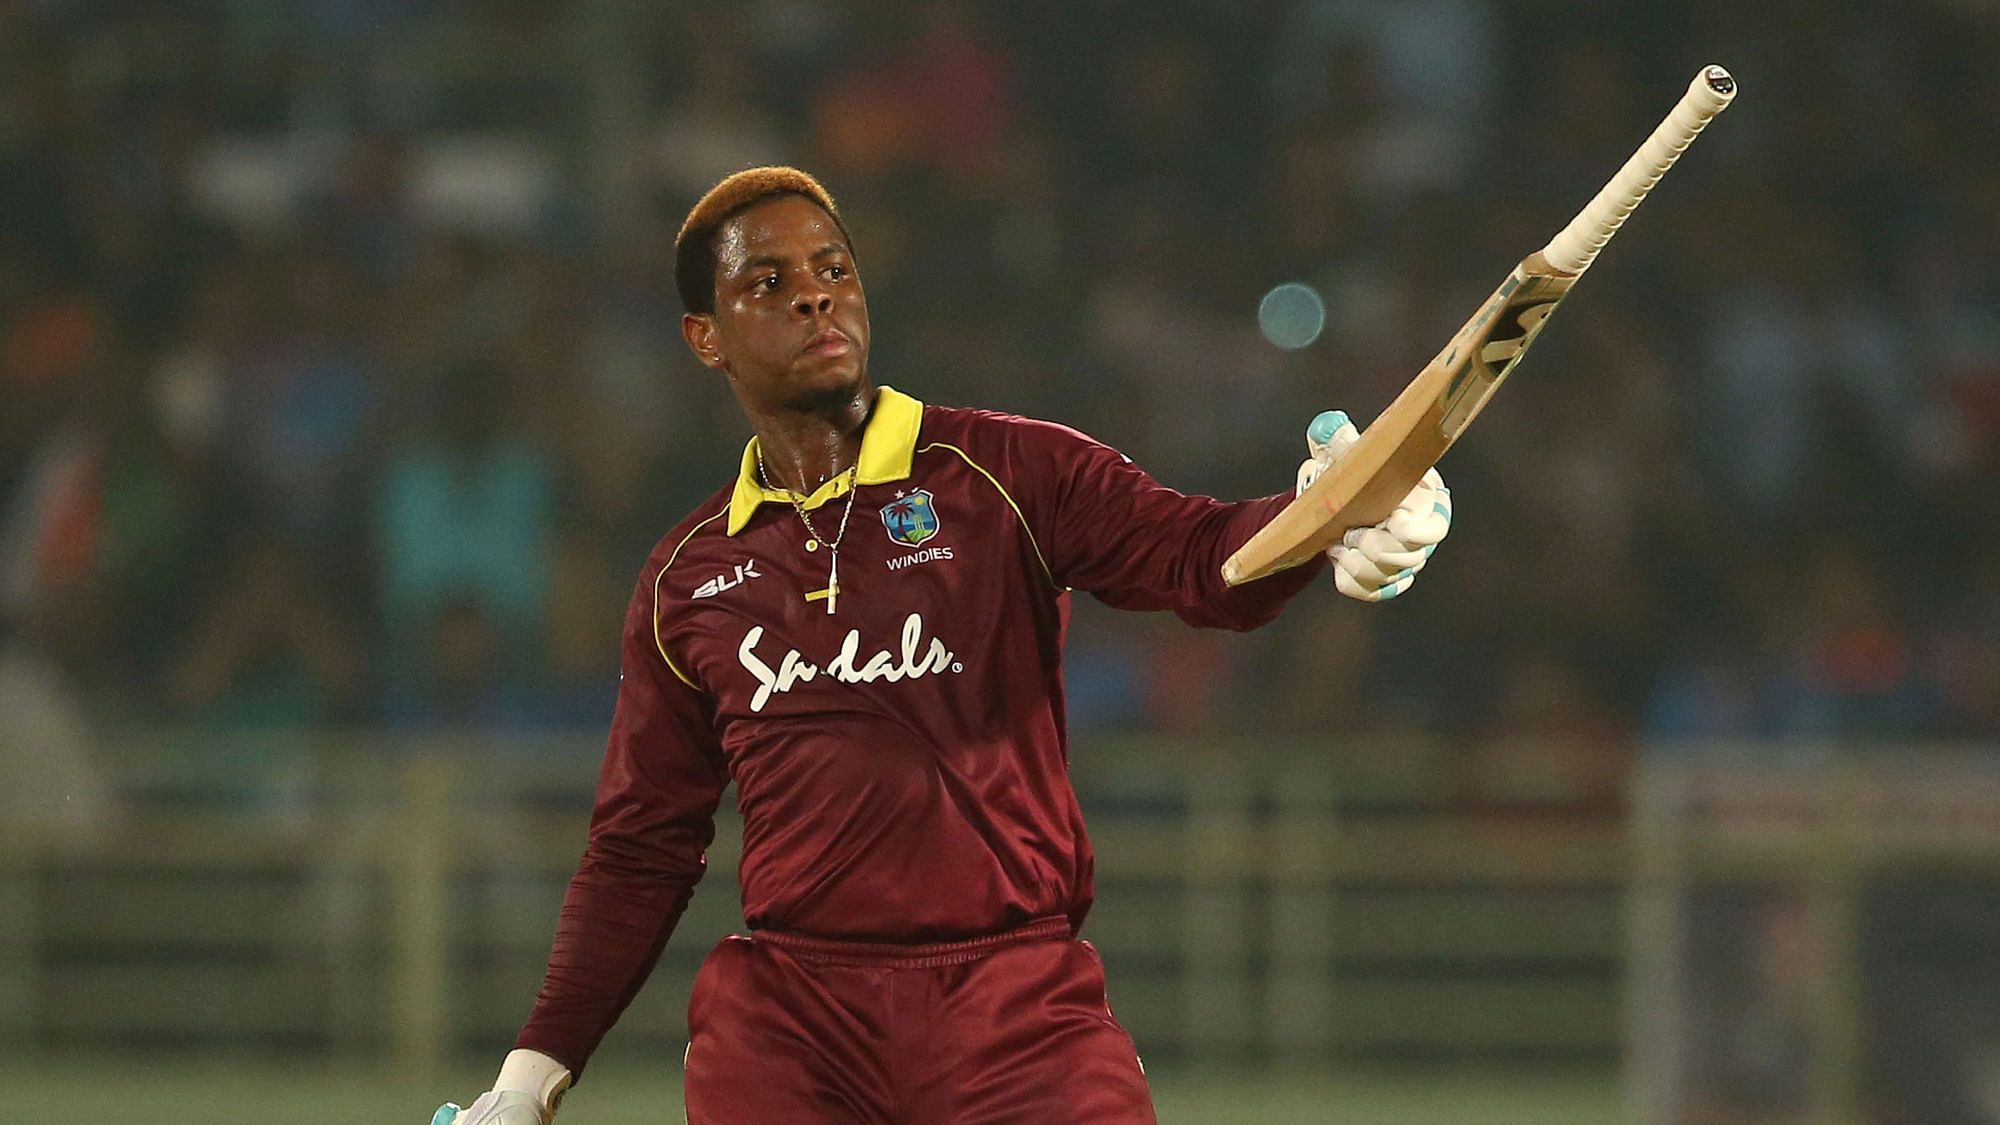 West Indian batsman Shimron Hetmyer seen celebrating a half-century during his team’s second ODI against India at Visakhapatnam.